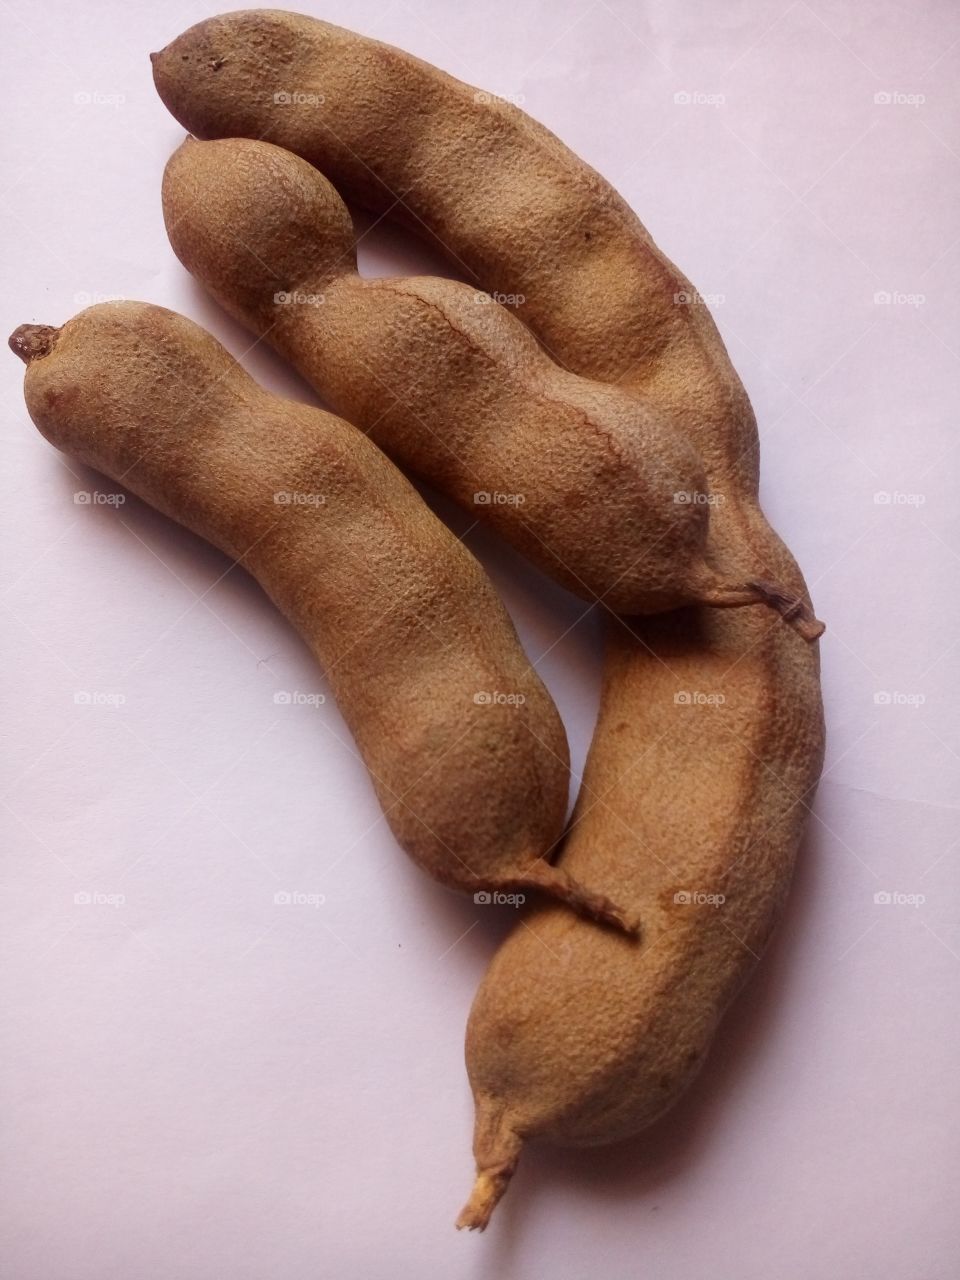 Tamarind - (Tamarindus indica) is a leguminous tree in the family Fabaceae ... that it is sometimes reported to be indigenous there, where it is known as imli in Hindi-Urdu. 